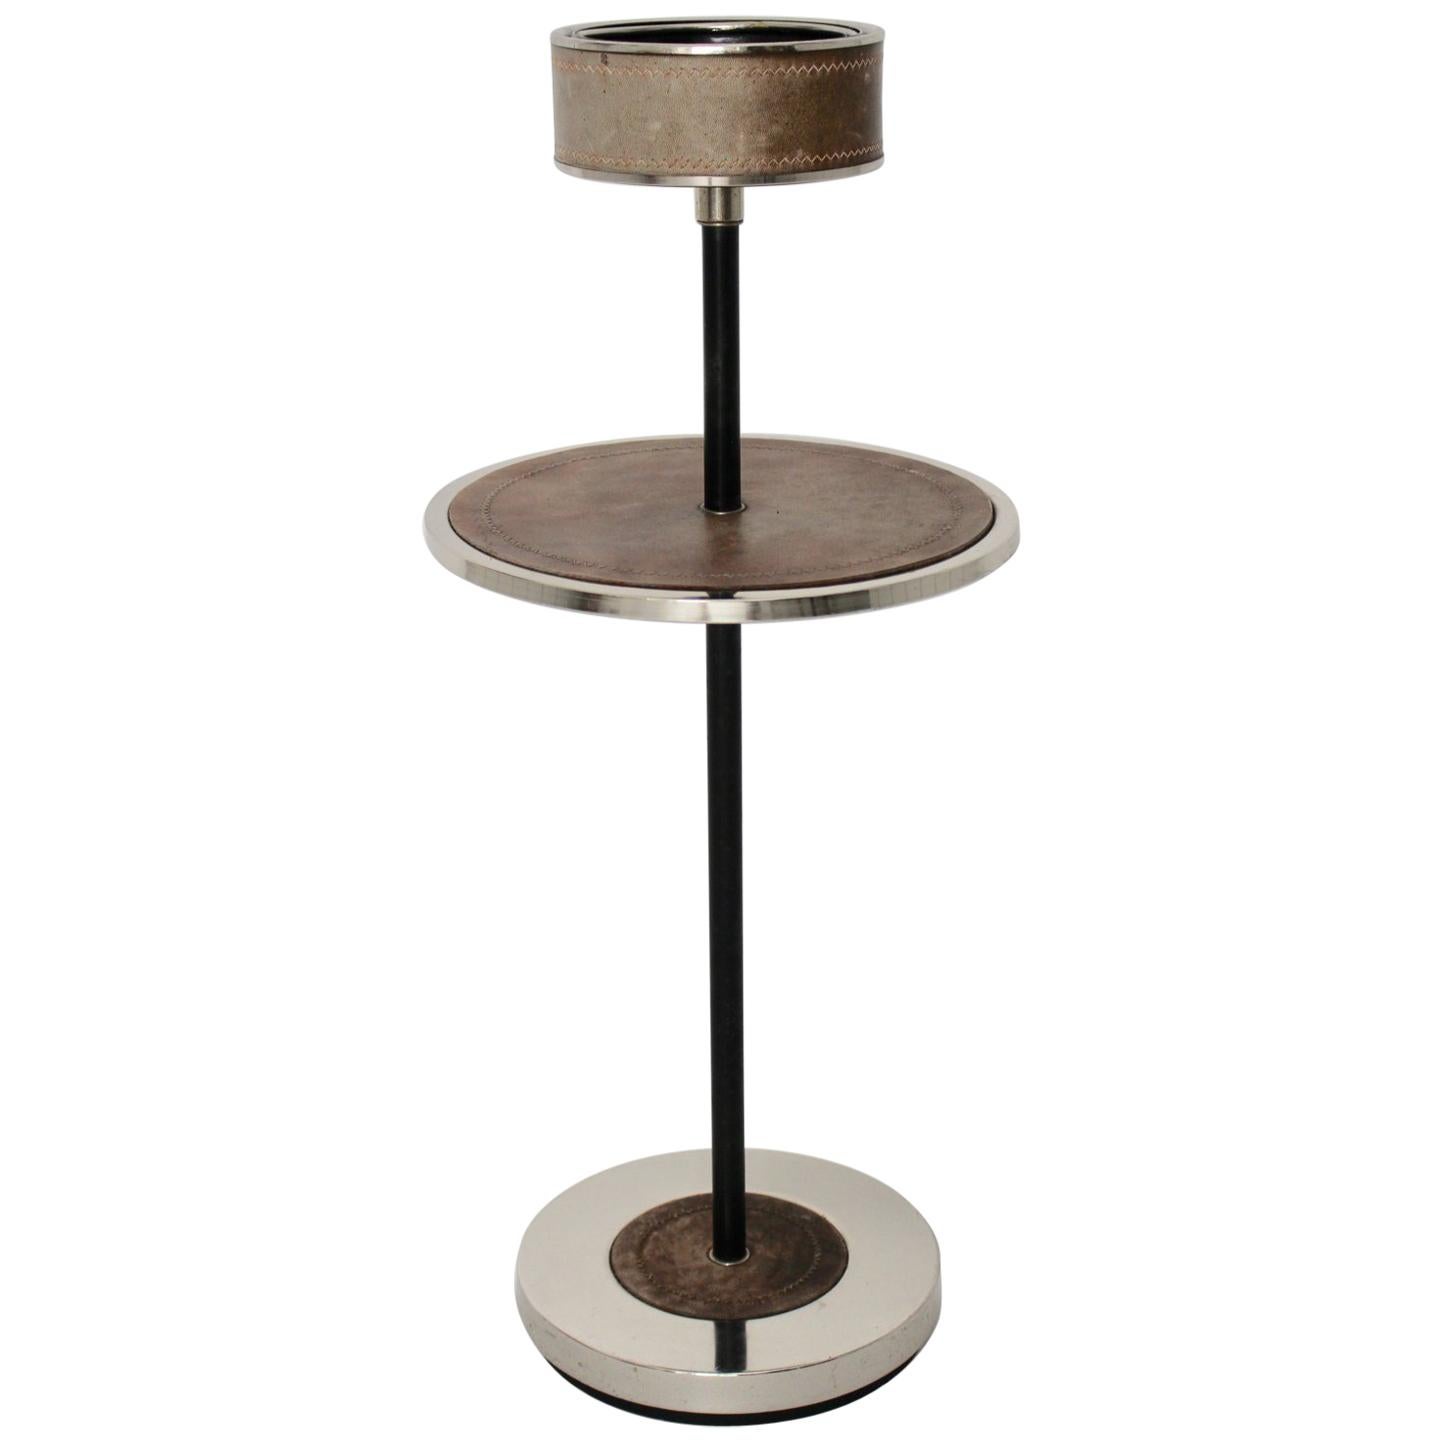 Mid-Century Modern Chromed Side Table with an Ashtray, 1970s